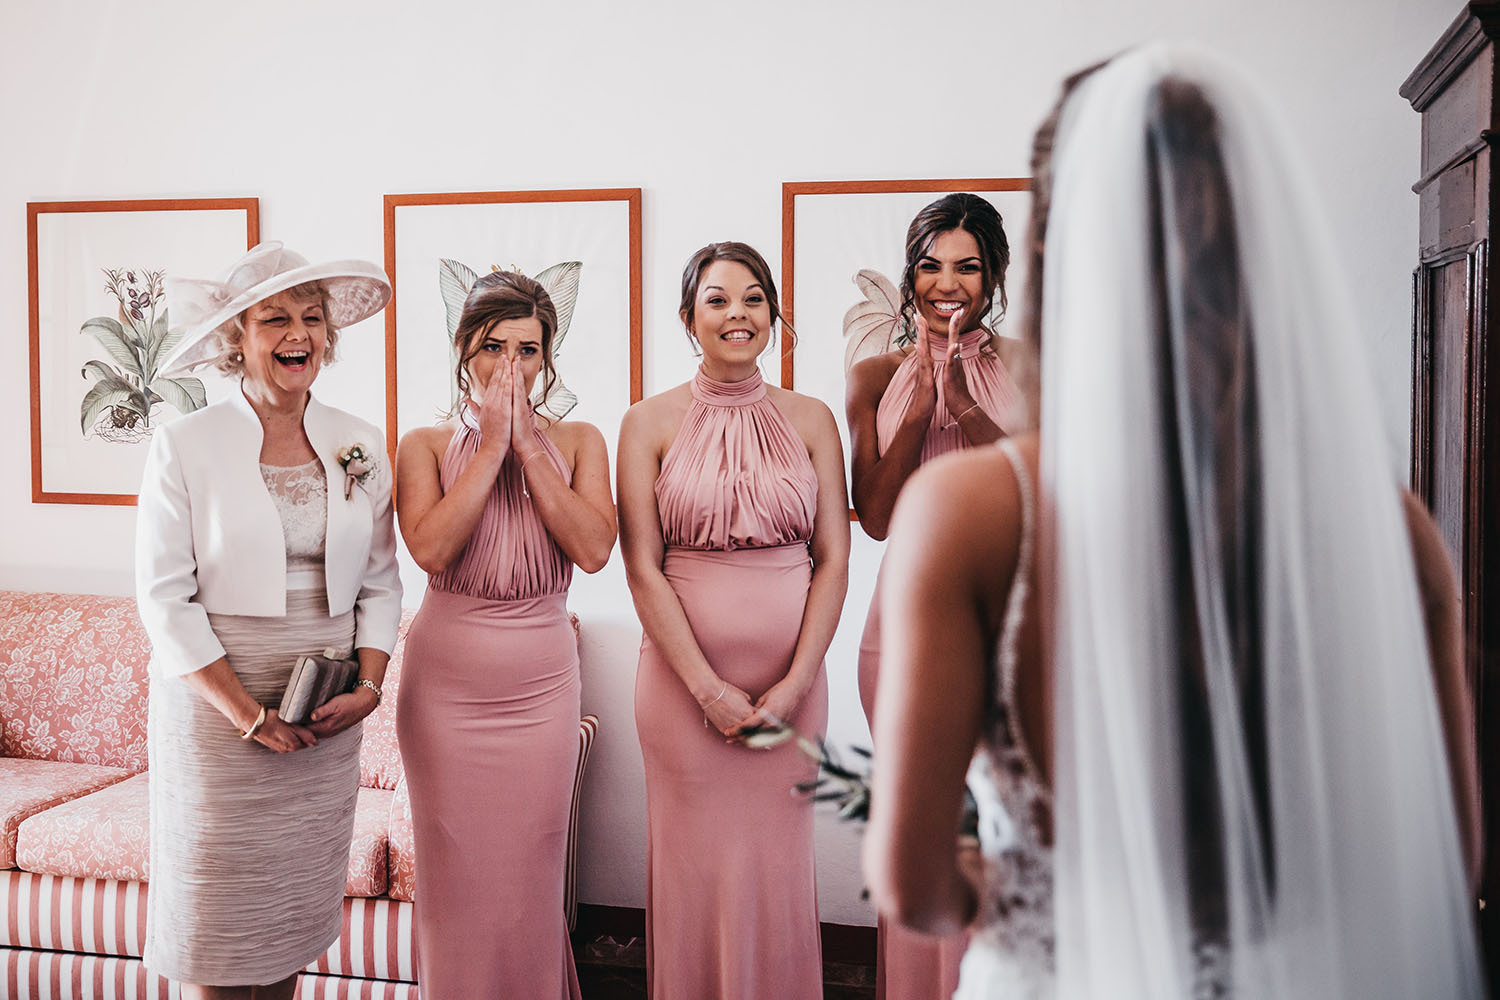 The bridesmaids were rocking matching halter neckline pink maxi dress with draped bodices